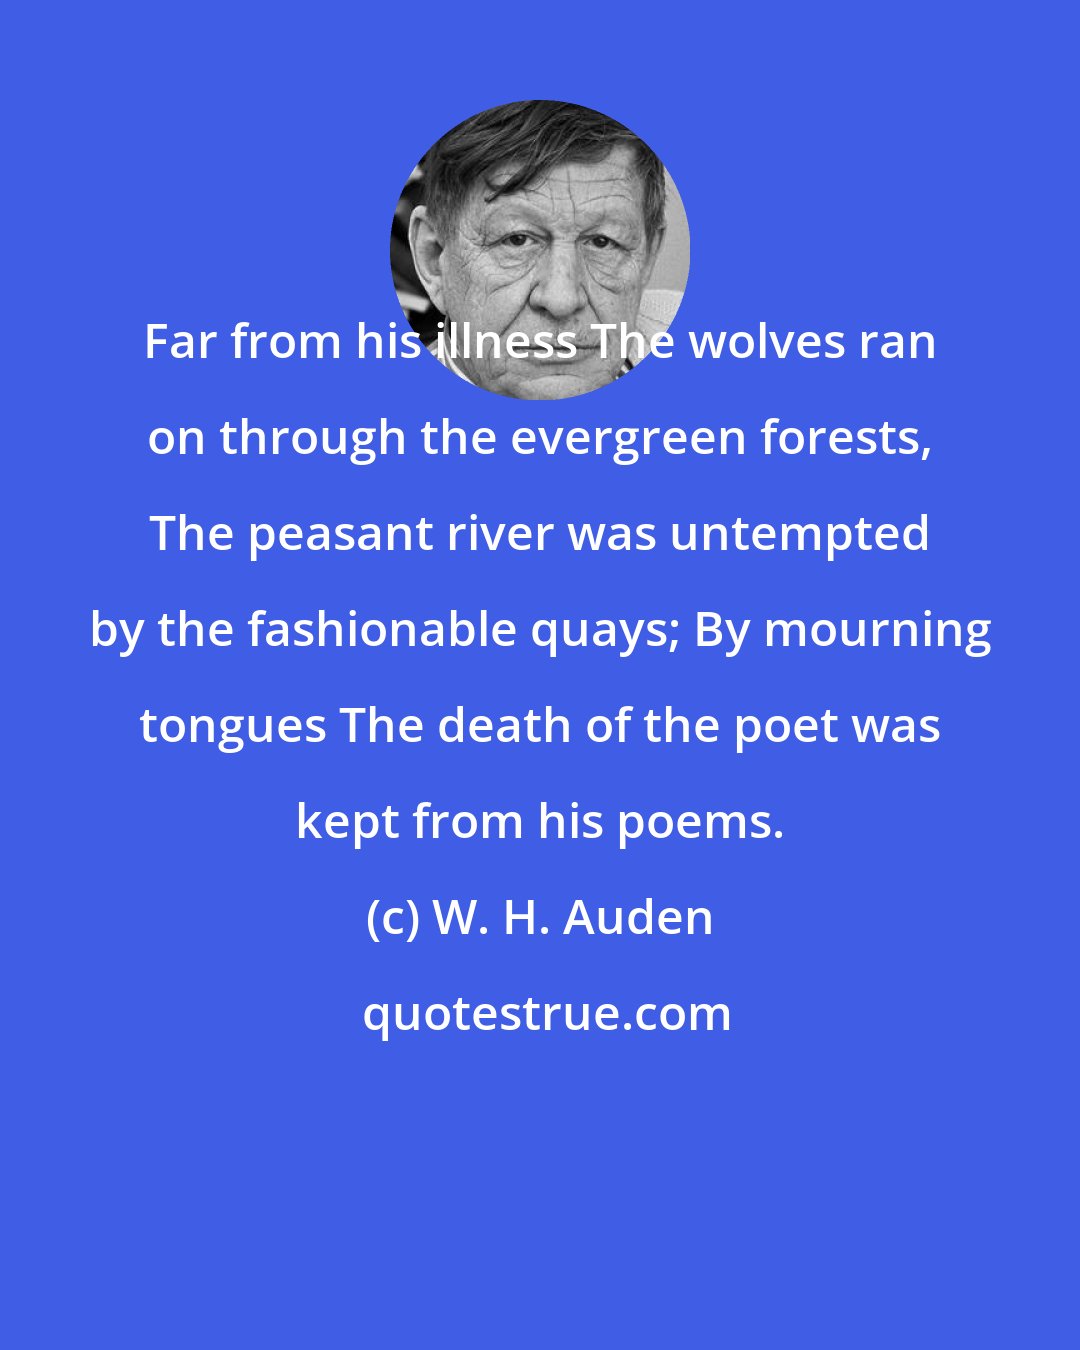 W. H. Auden: Far from his illness The wolves ran on through the evergreen forests, The peasant river was untempted by the fashionable quays; By mourning tongues The death of the poet was kept from his poems.